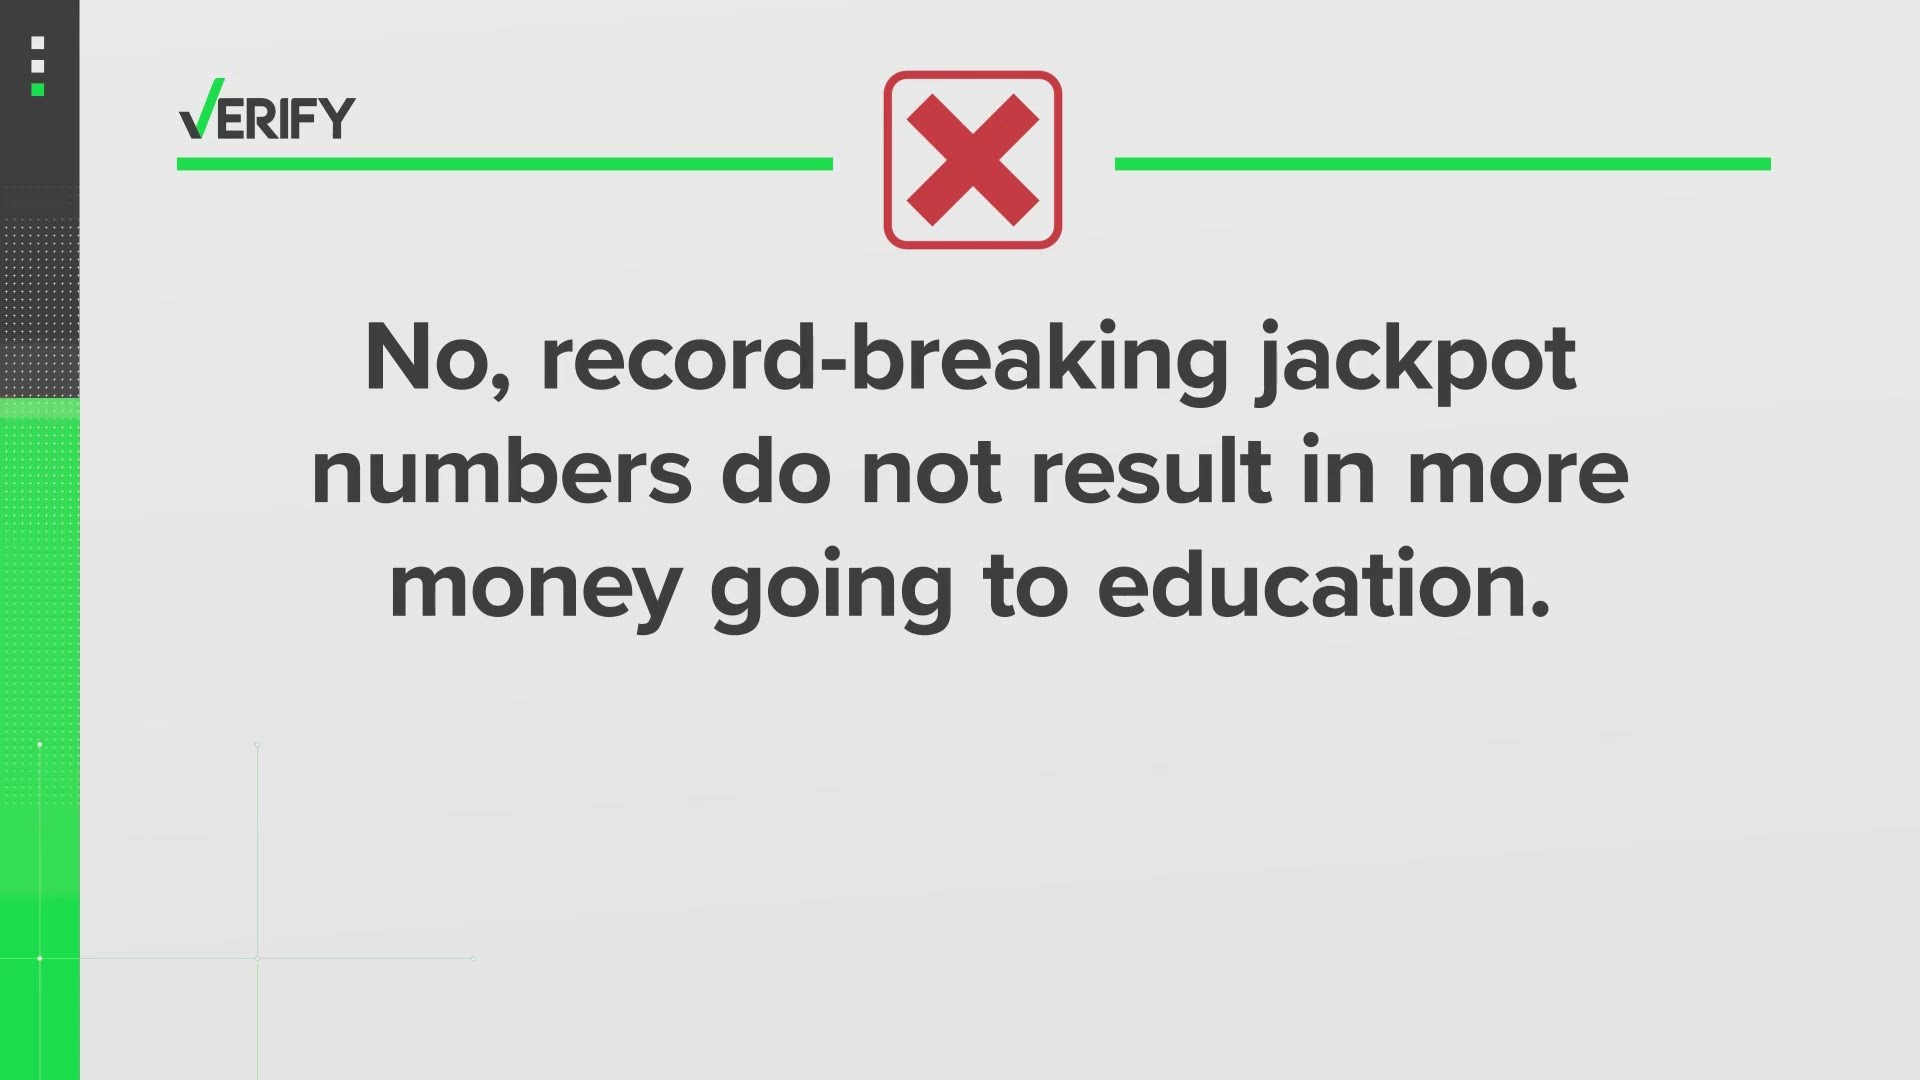 Ohio Lottery profits help fund Ohio's school budget for the year, but don't create any additional support for schools.